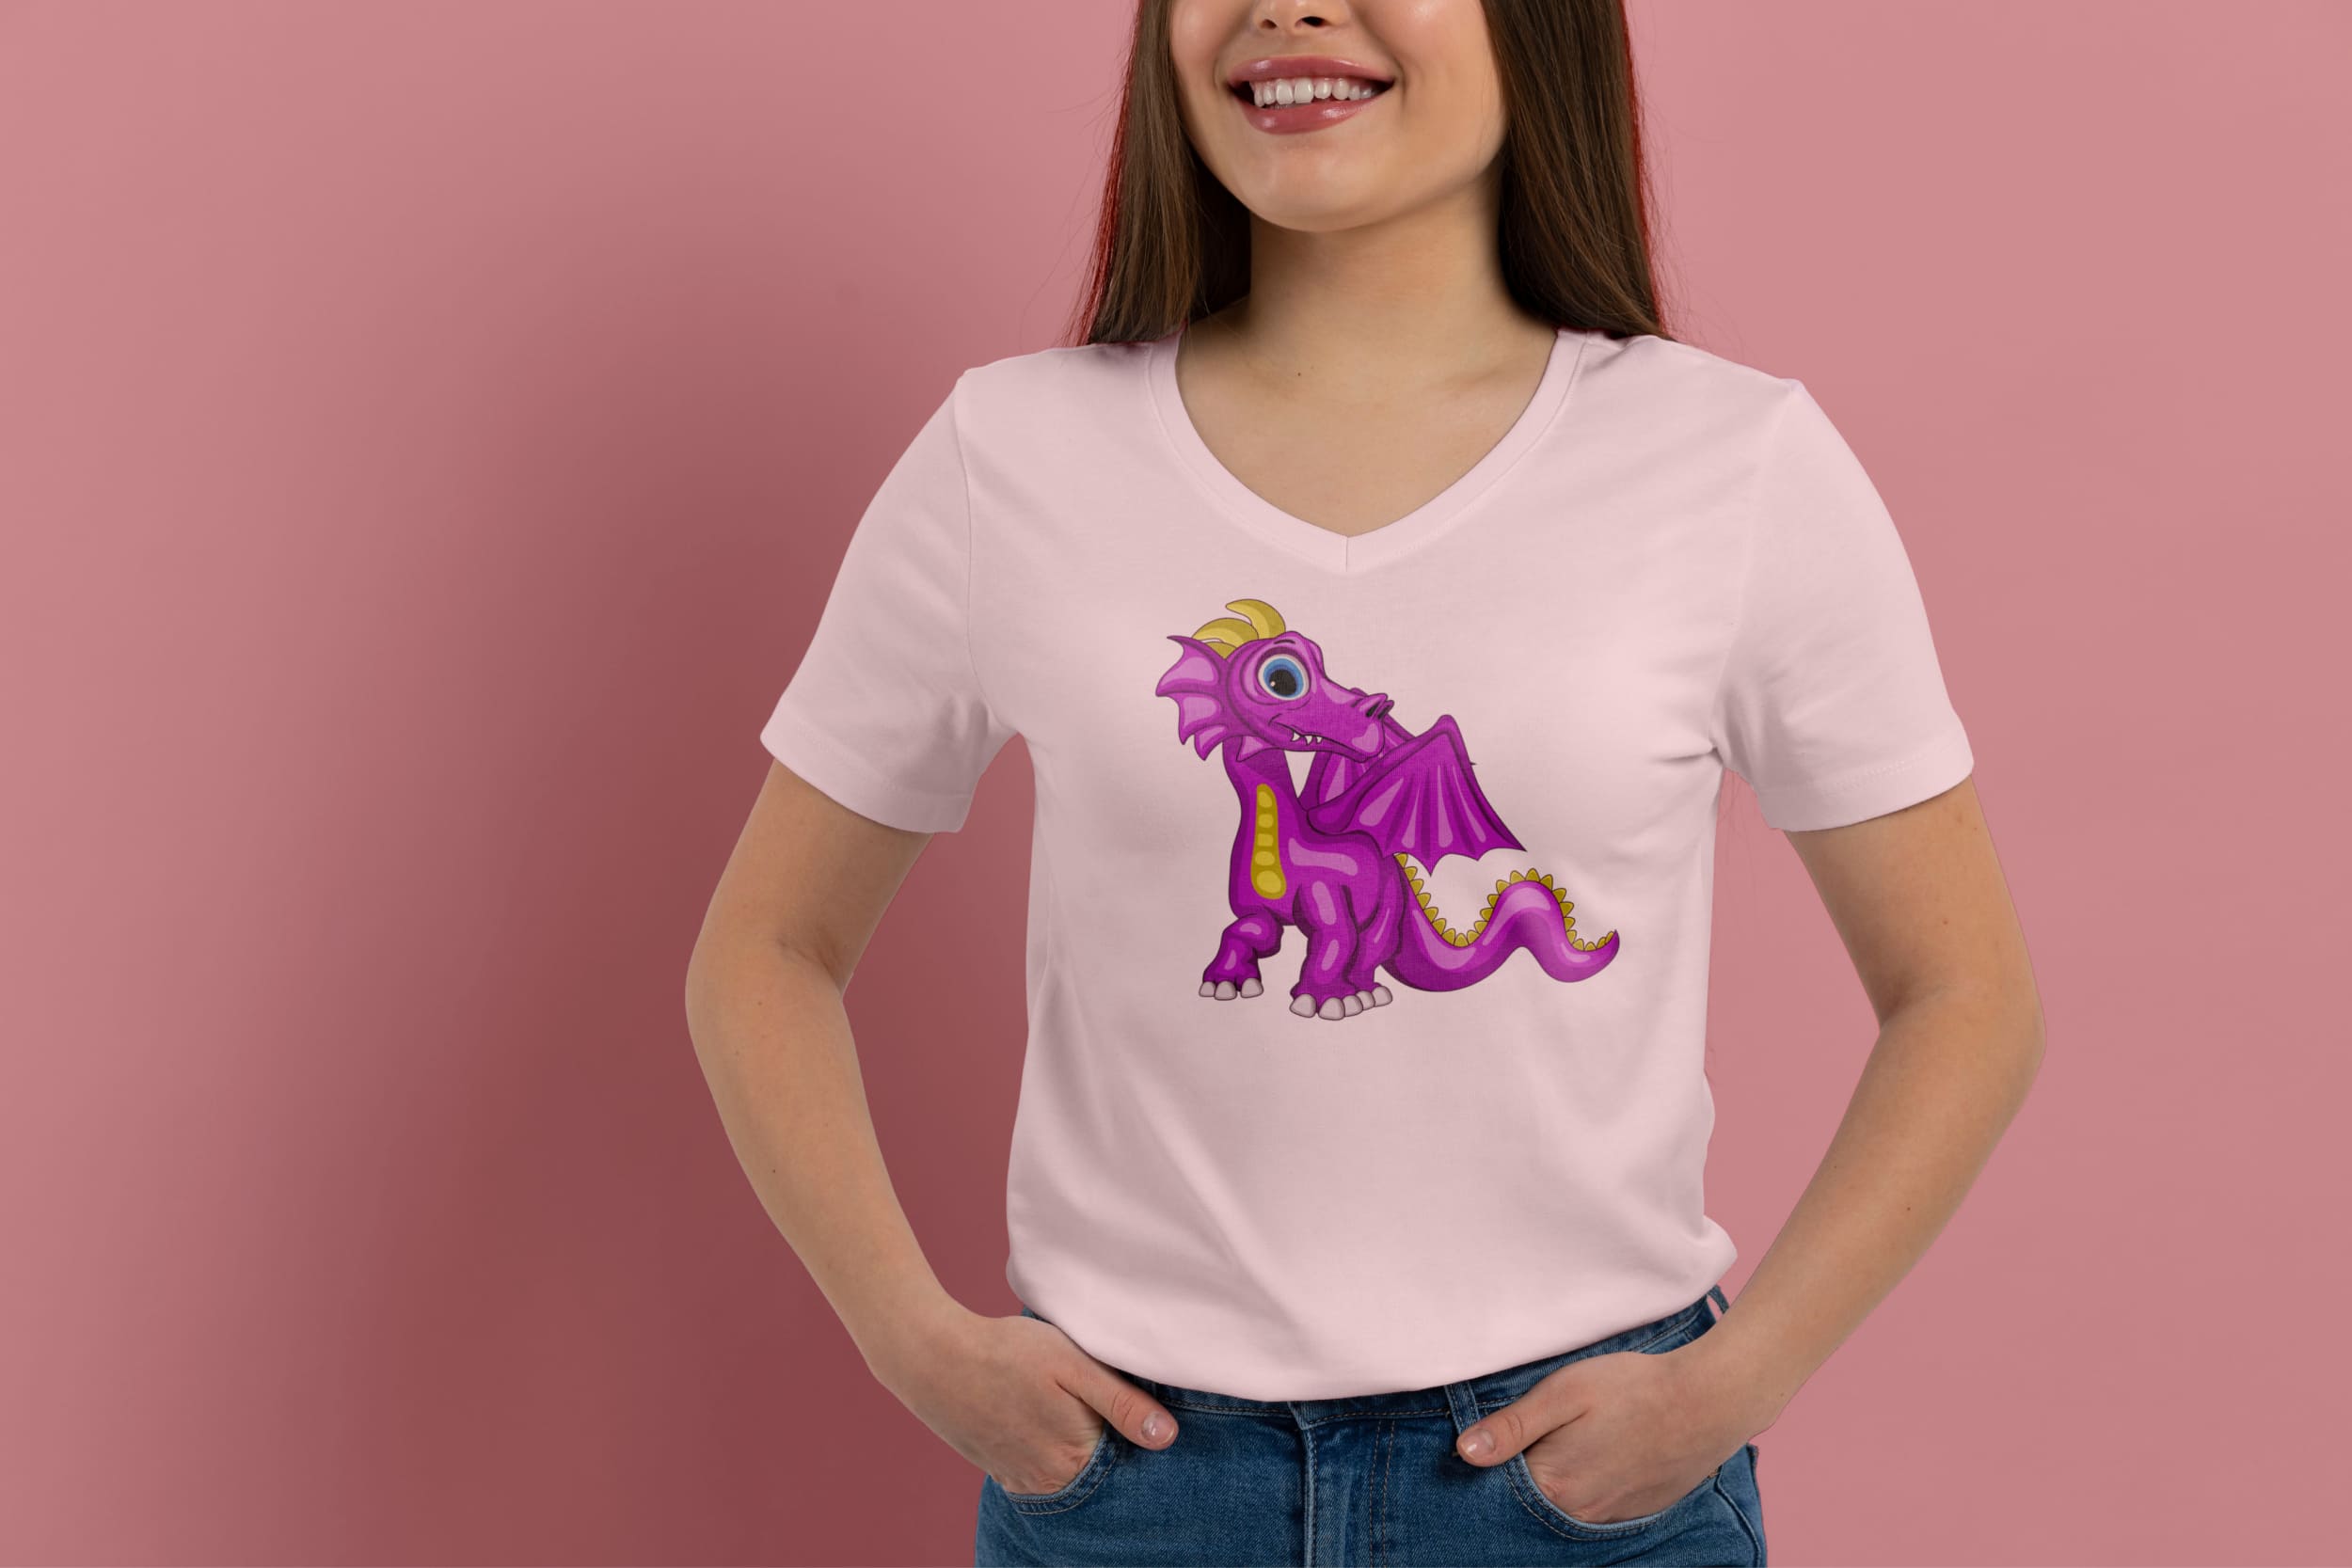 Light pink t-shirt on a girl with a purple baby dragon, on a pink background.